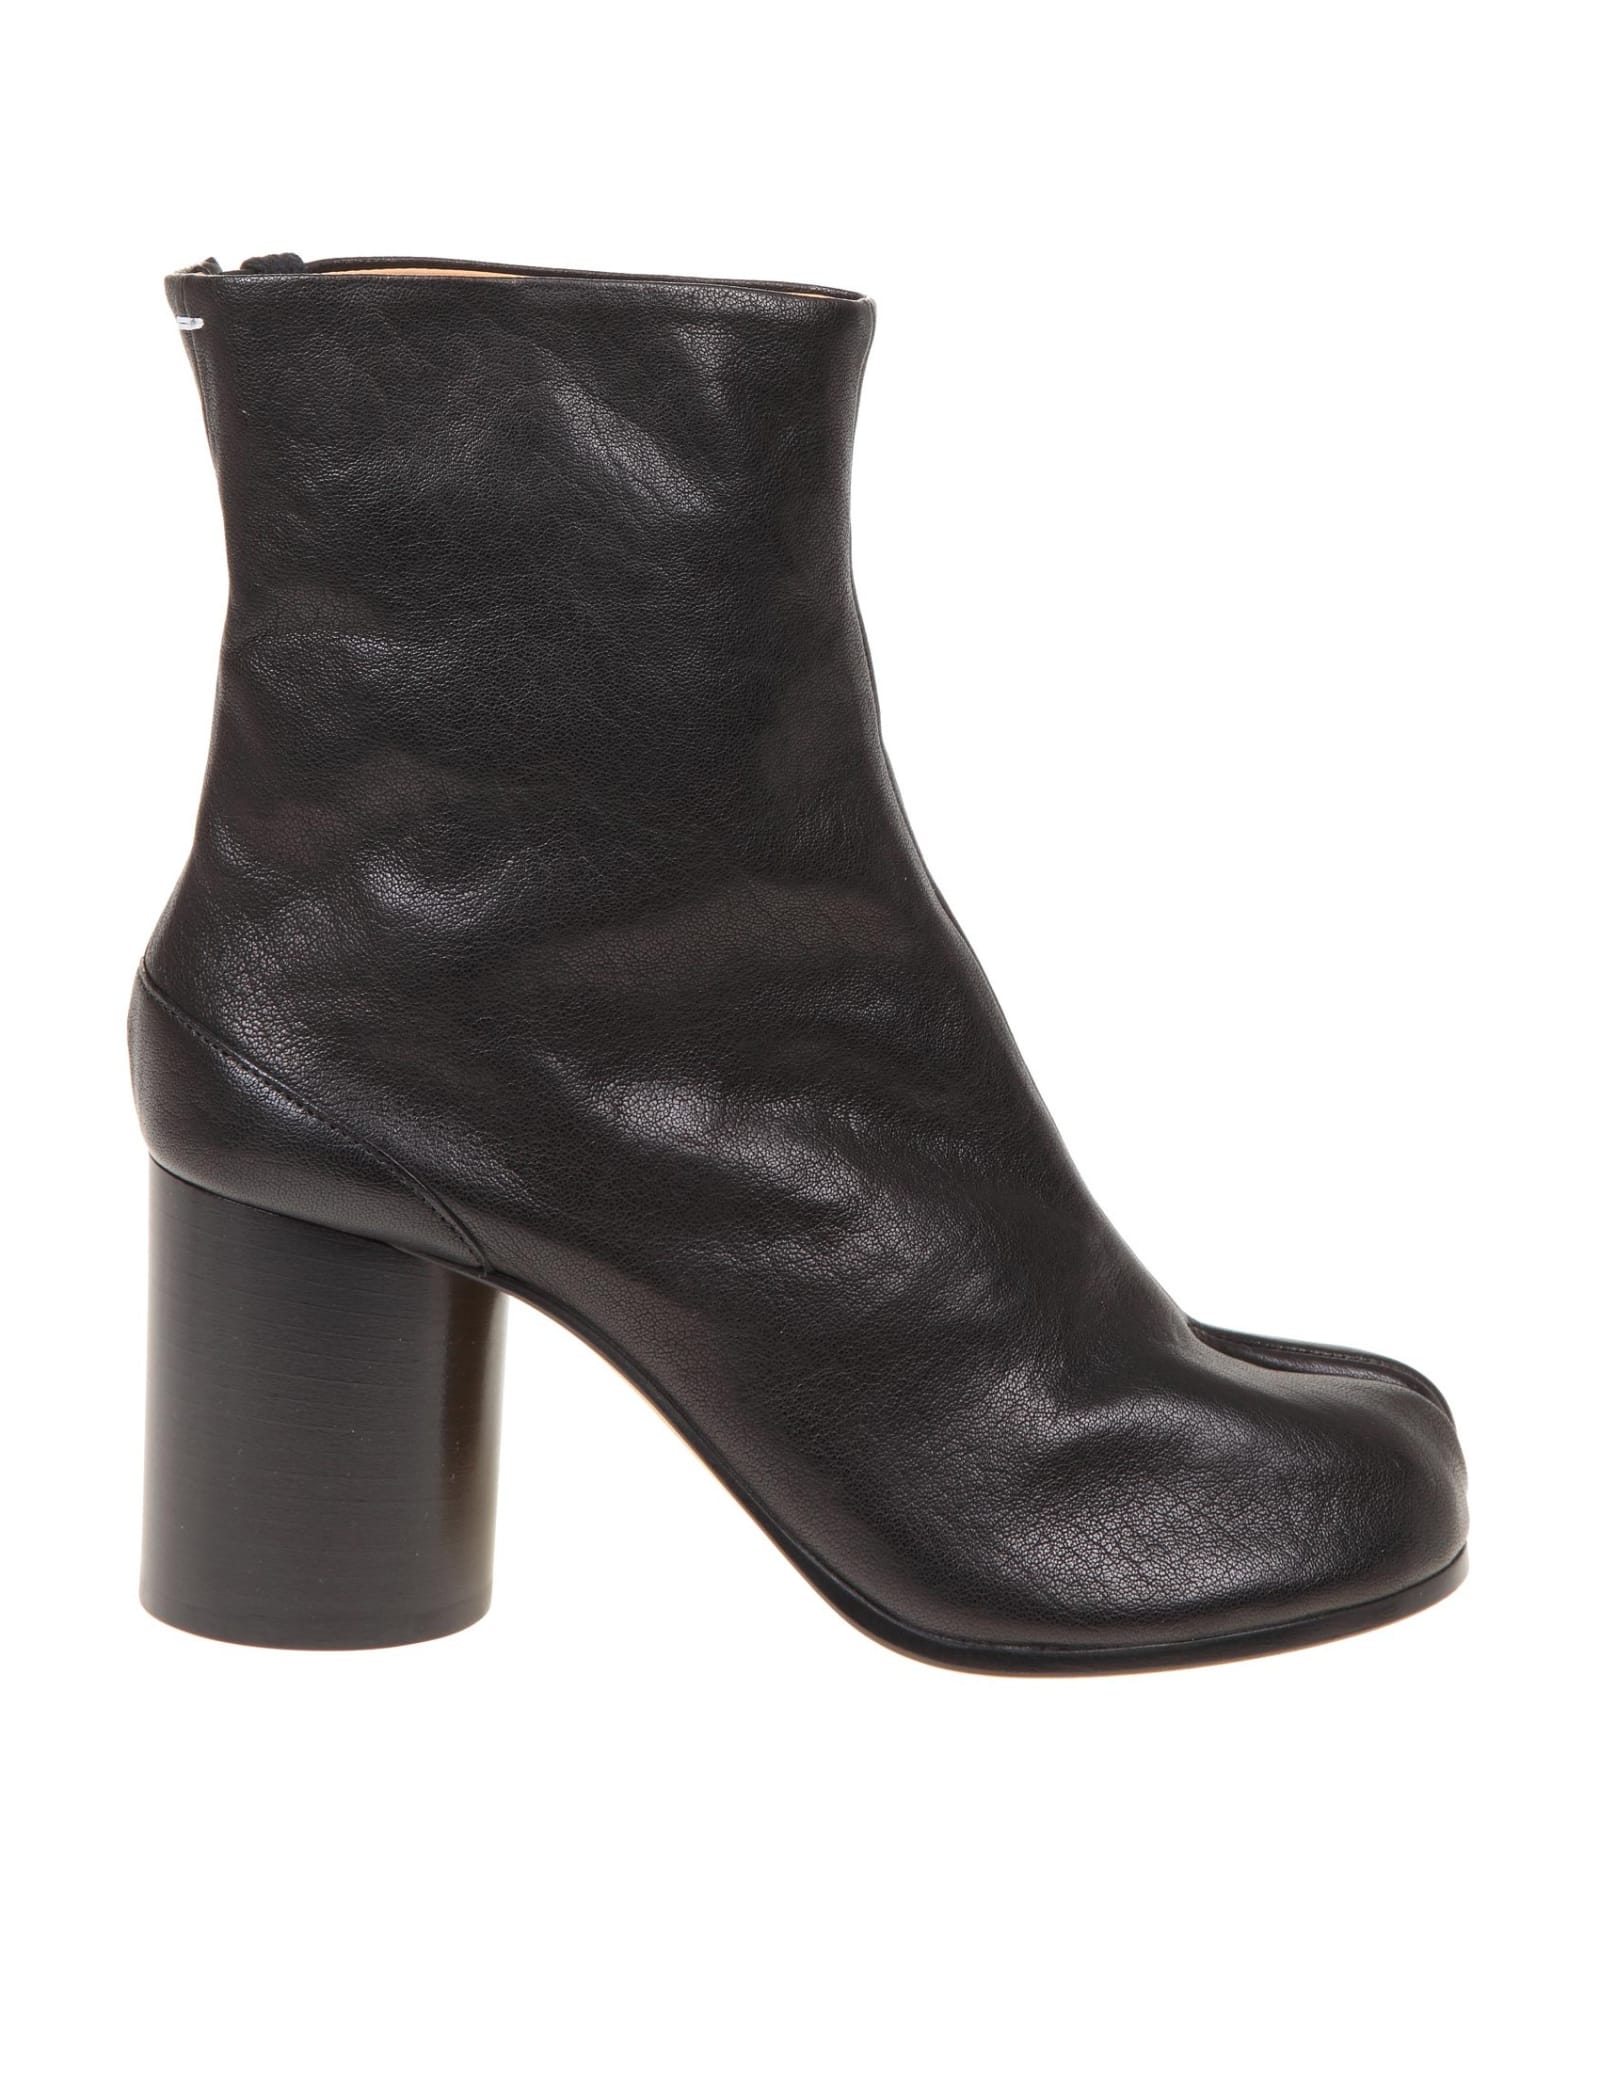 Buy Maison Margiela Tabi Boots In Soft Black Nappa online, shop Maison Margiela shoes with free shipping